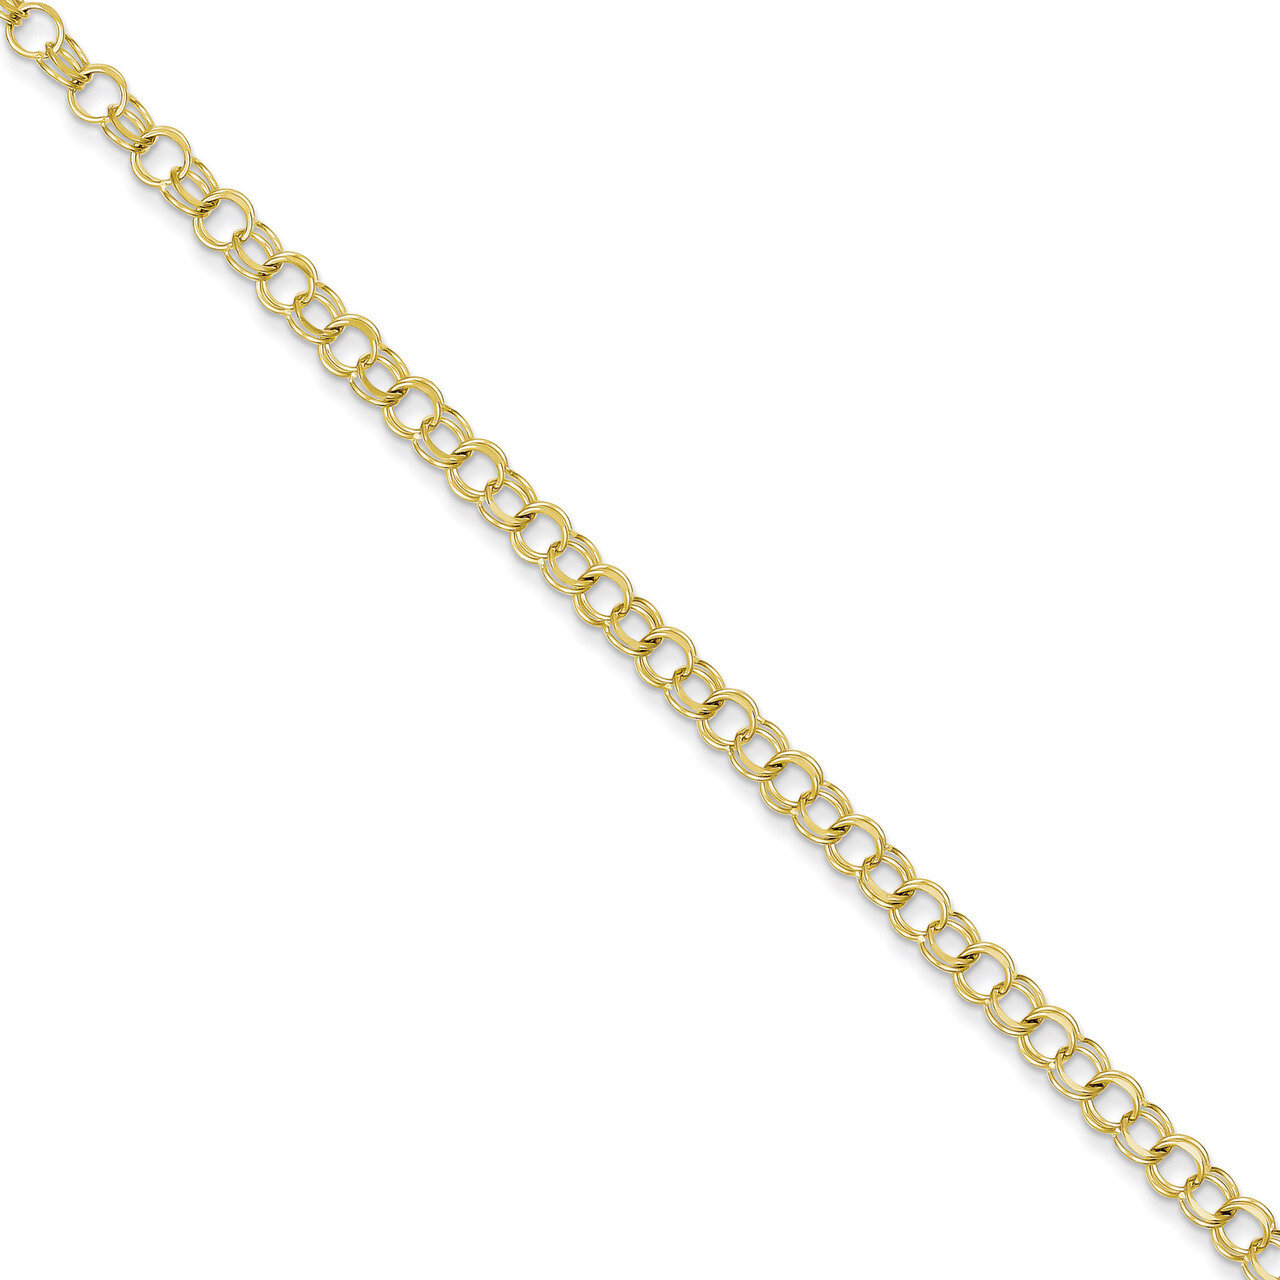 Solid Double Link Charm Bracelet 8 Inch 10k Gold 10CH1-8